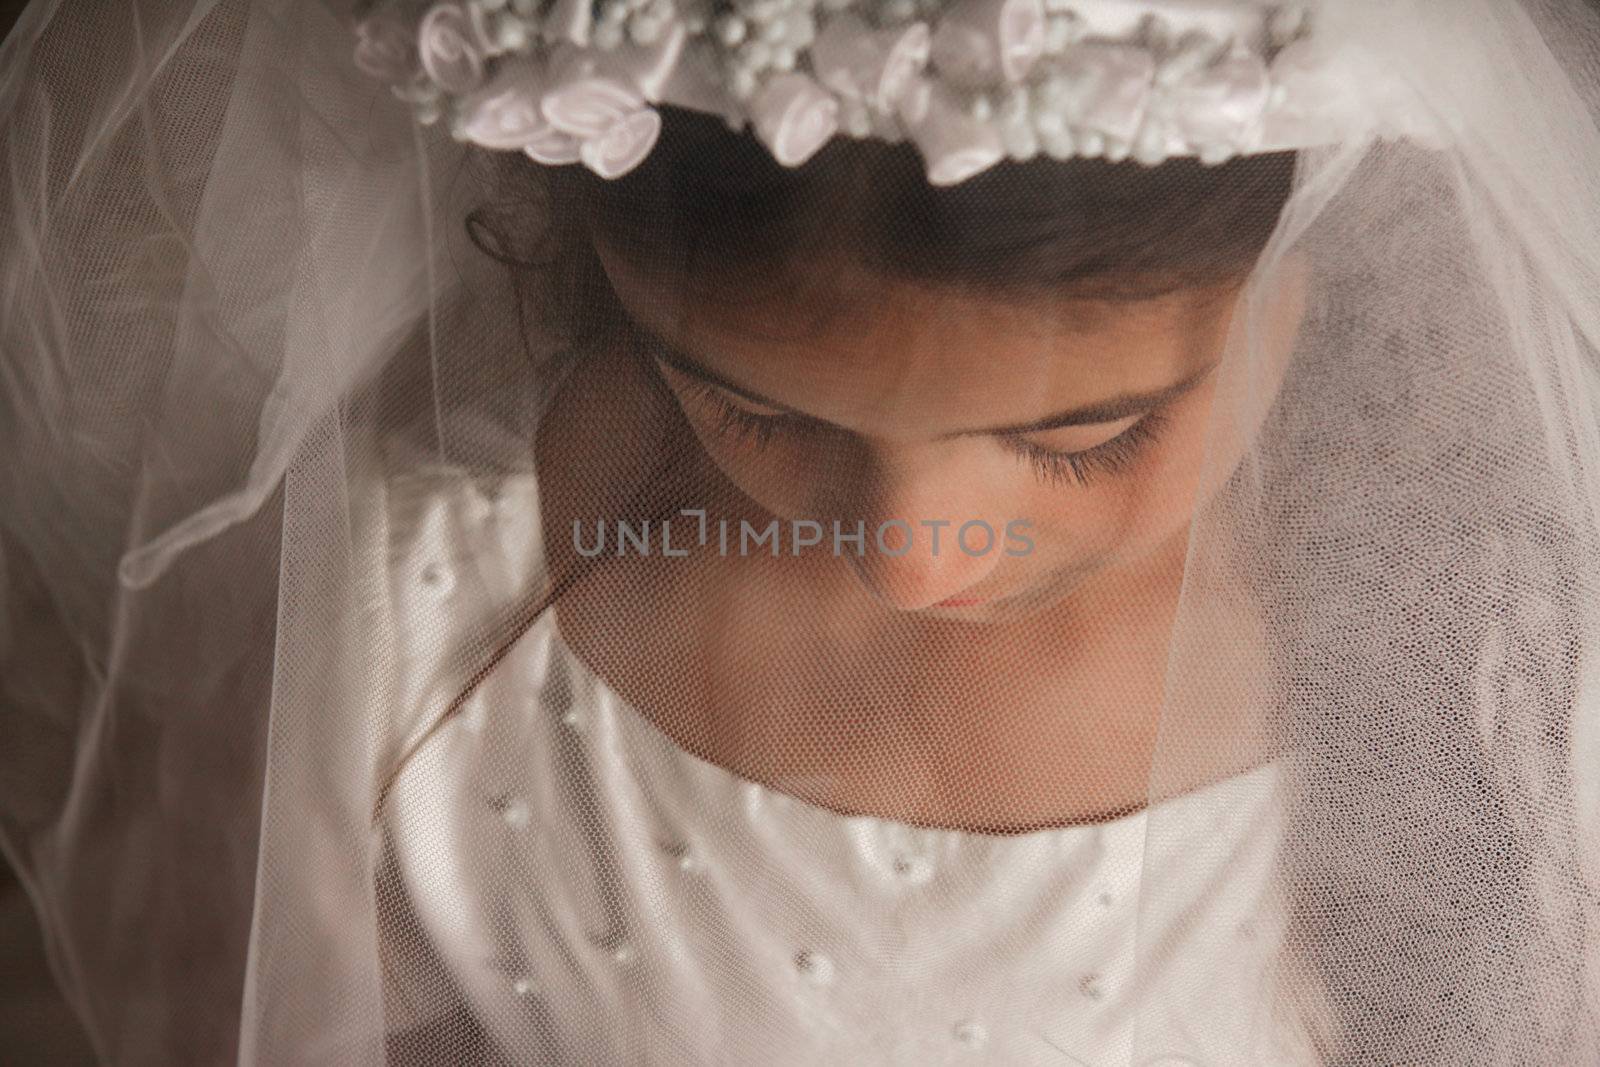 Girl celebrating her First Communion. Her face is covered by her veil, and she is looking down. Sad, serious feeling. Horizontal photo